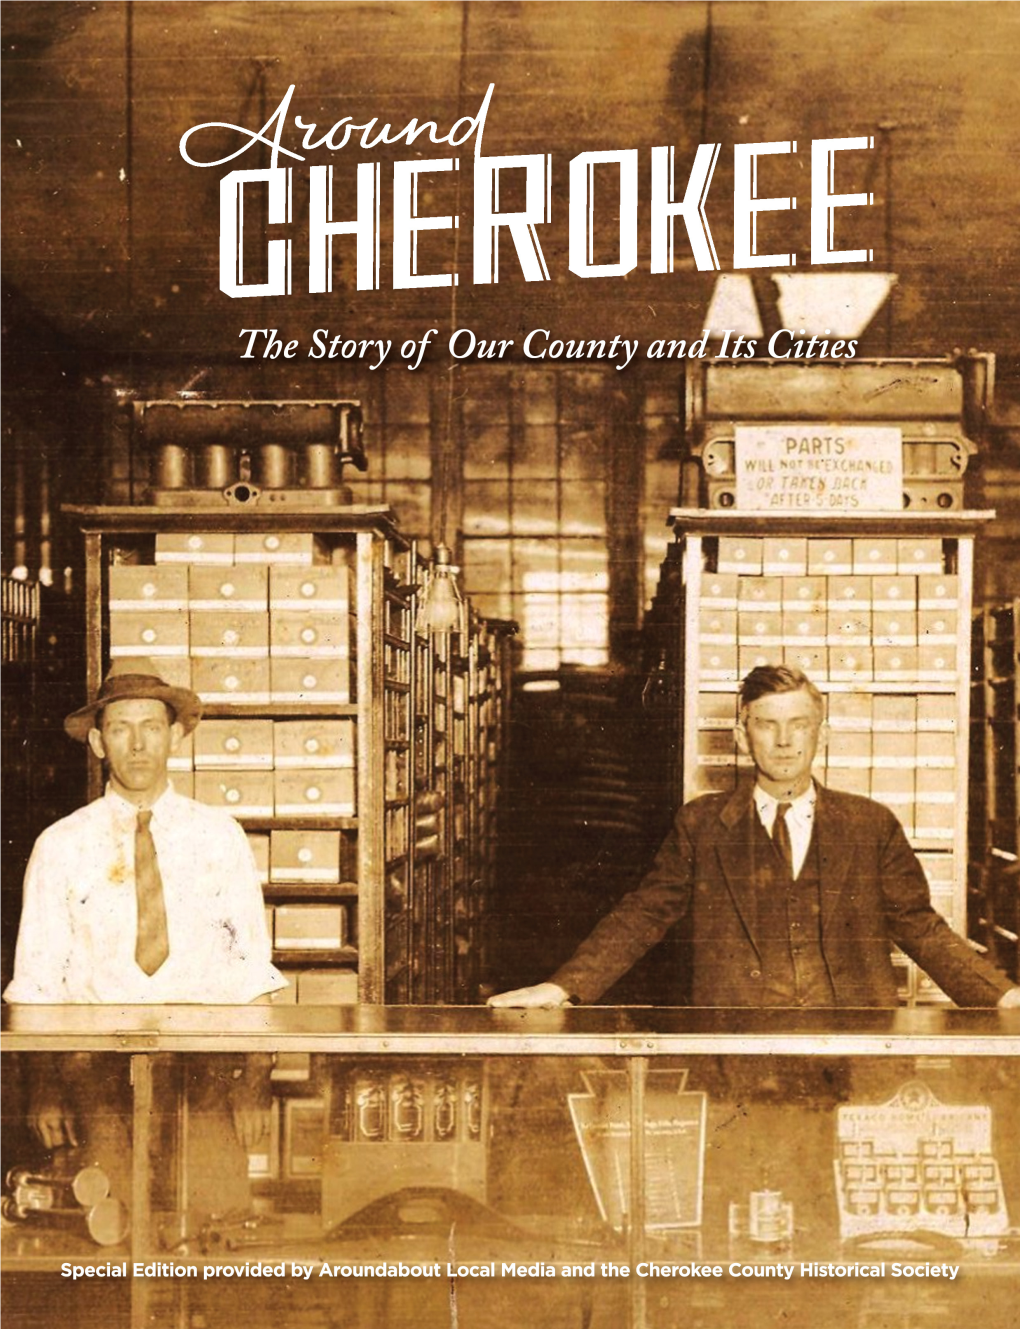 Around Cherokee -The Story of Our County and Its